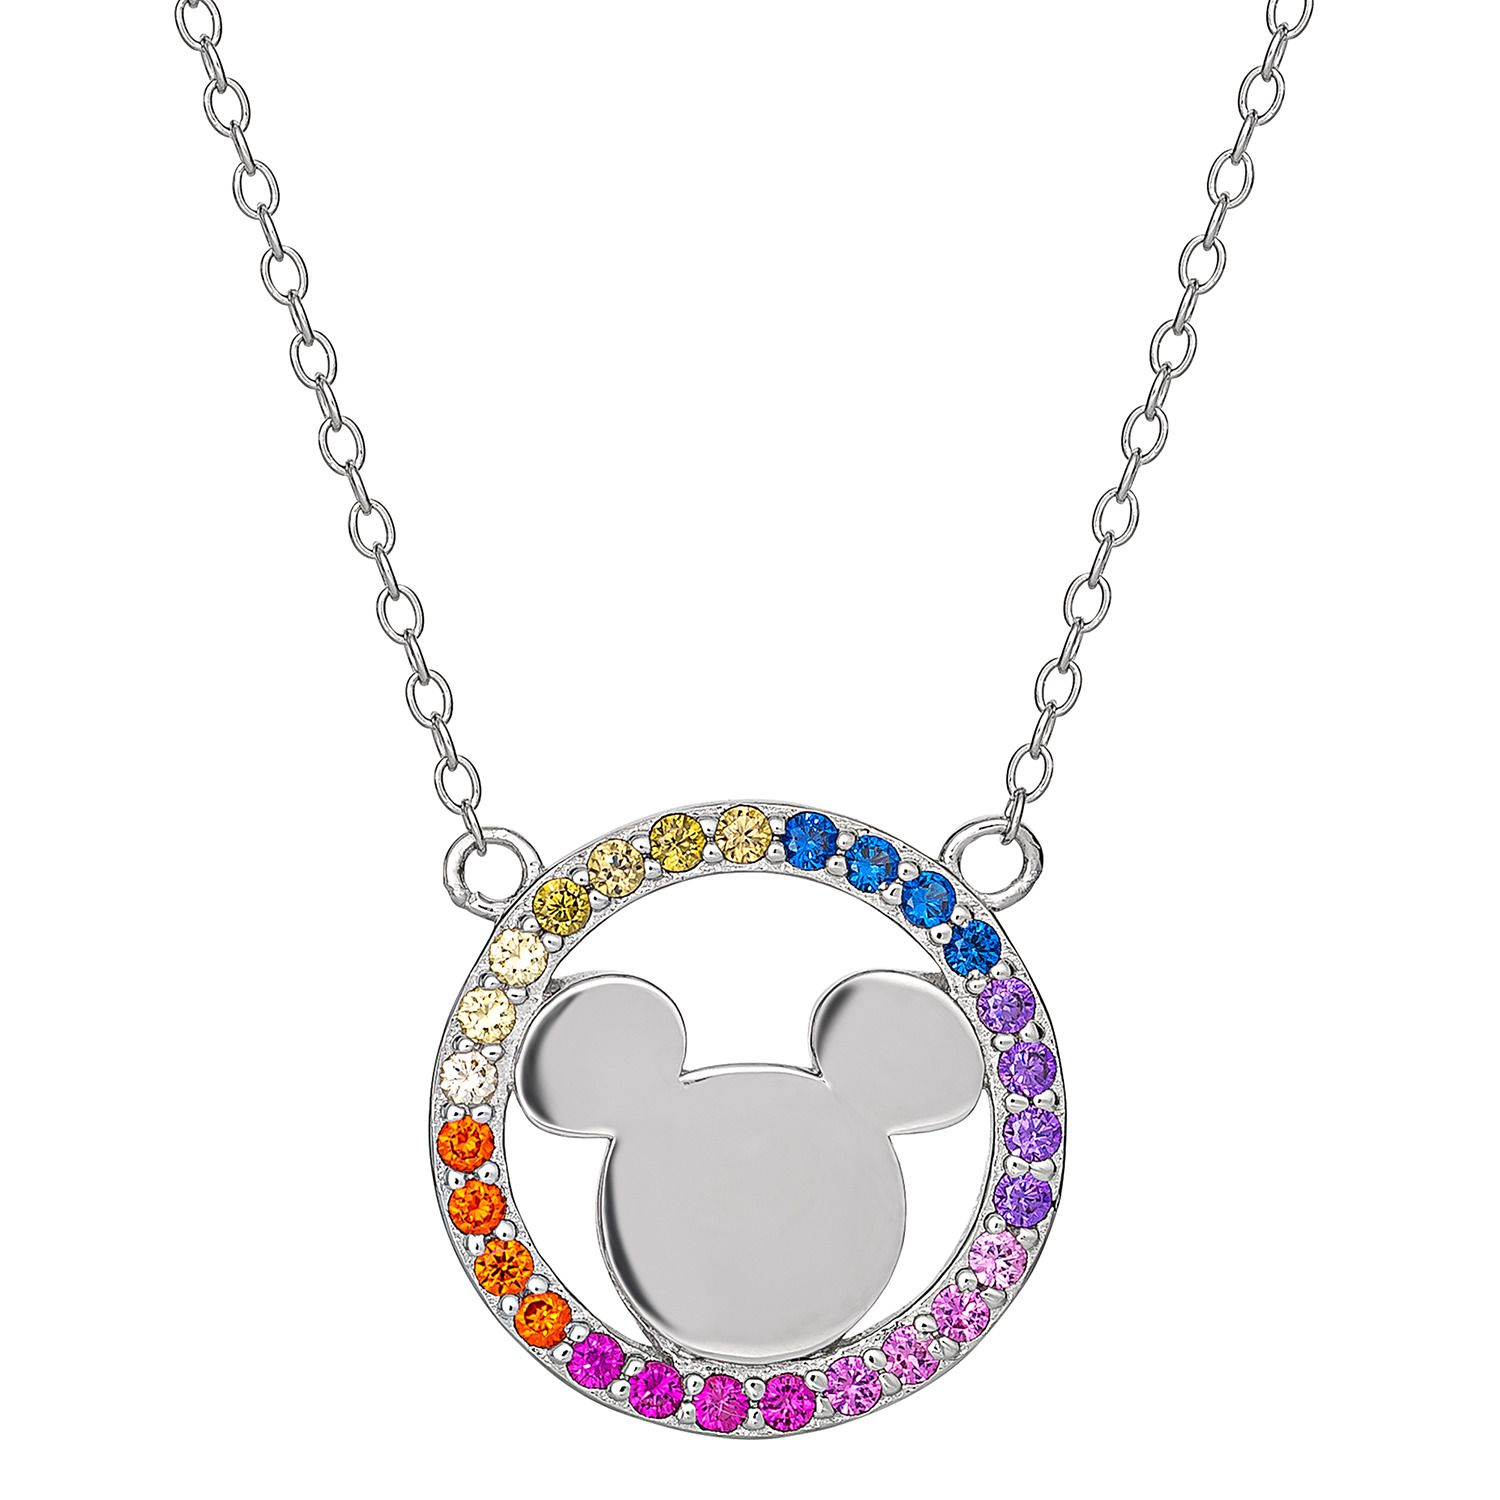 Image for Disney 's Mickey Mouse Sterling Silver Rainbow Cubic Zirconia Necklace at Kohl's.